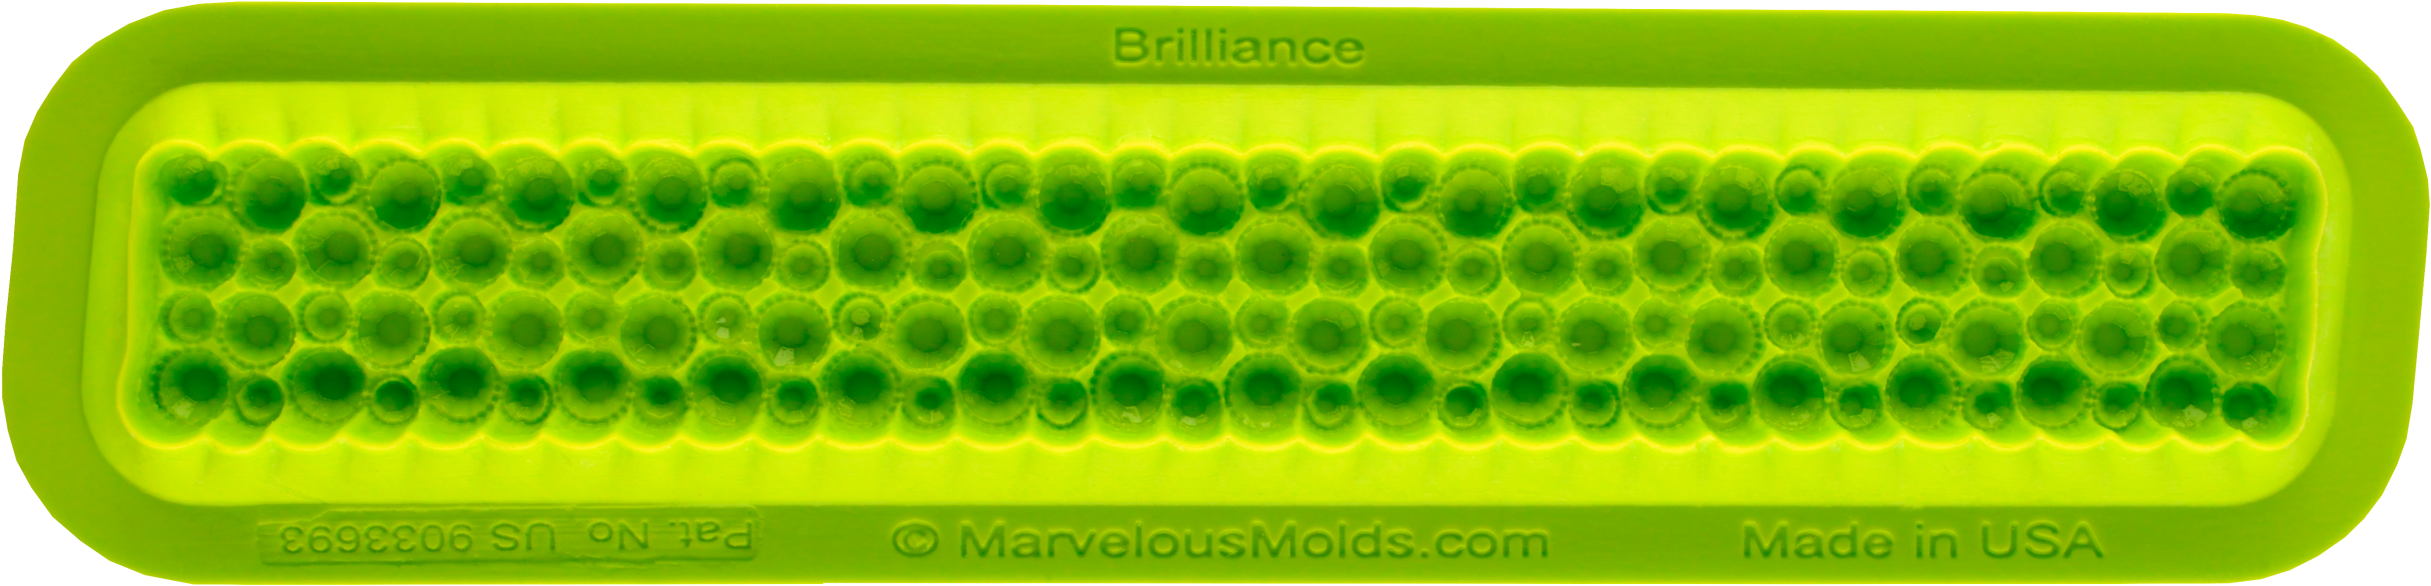 Brilliance Border Mold - Marvelous Molds Brilliance Mold (2479x640), Png Download